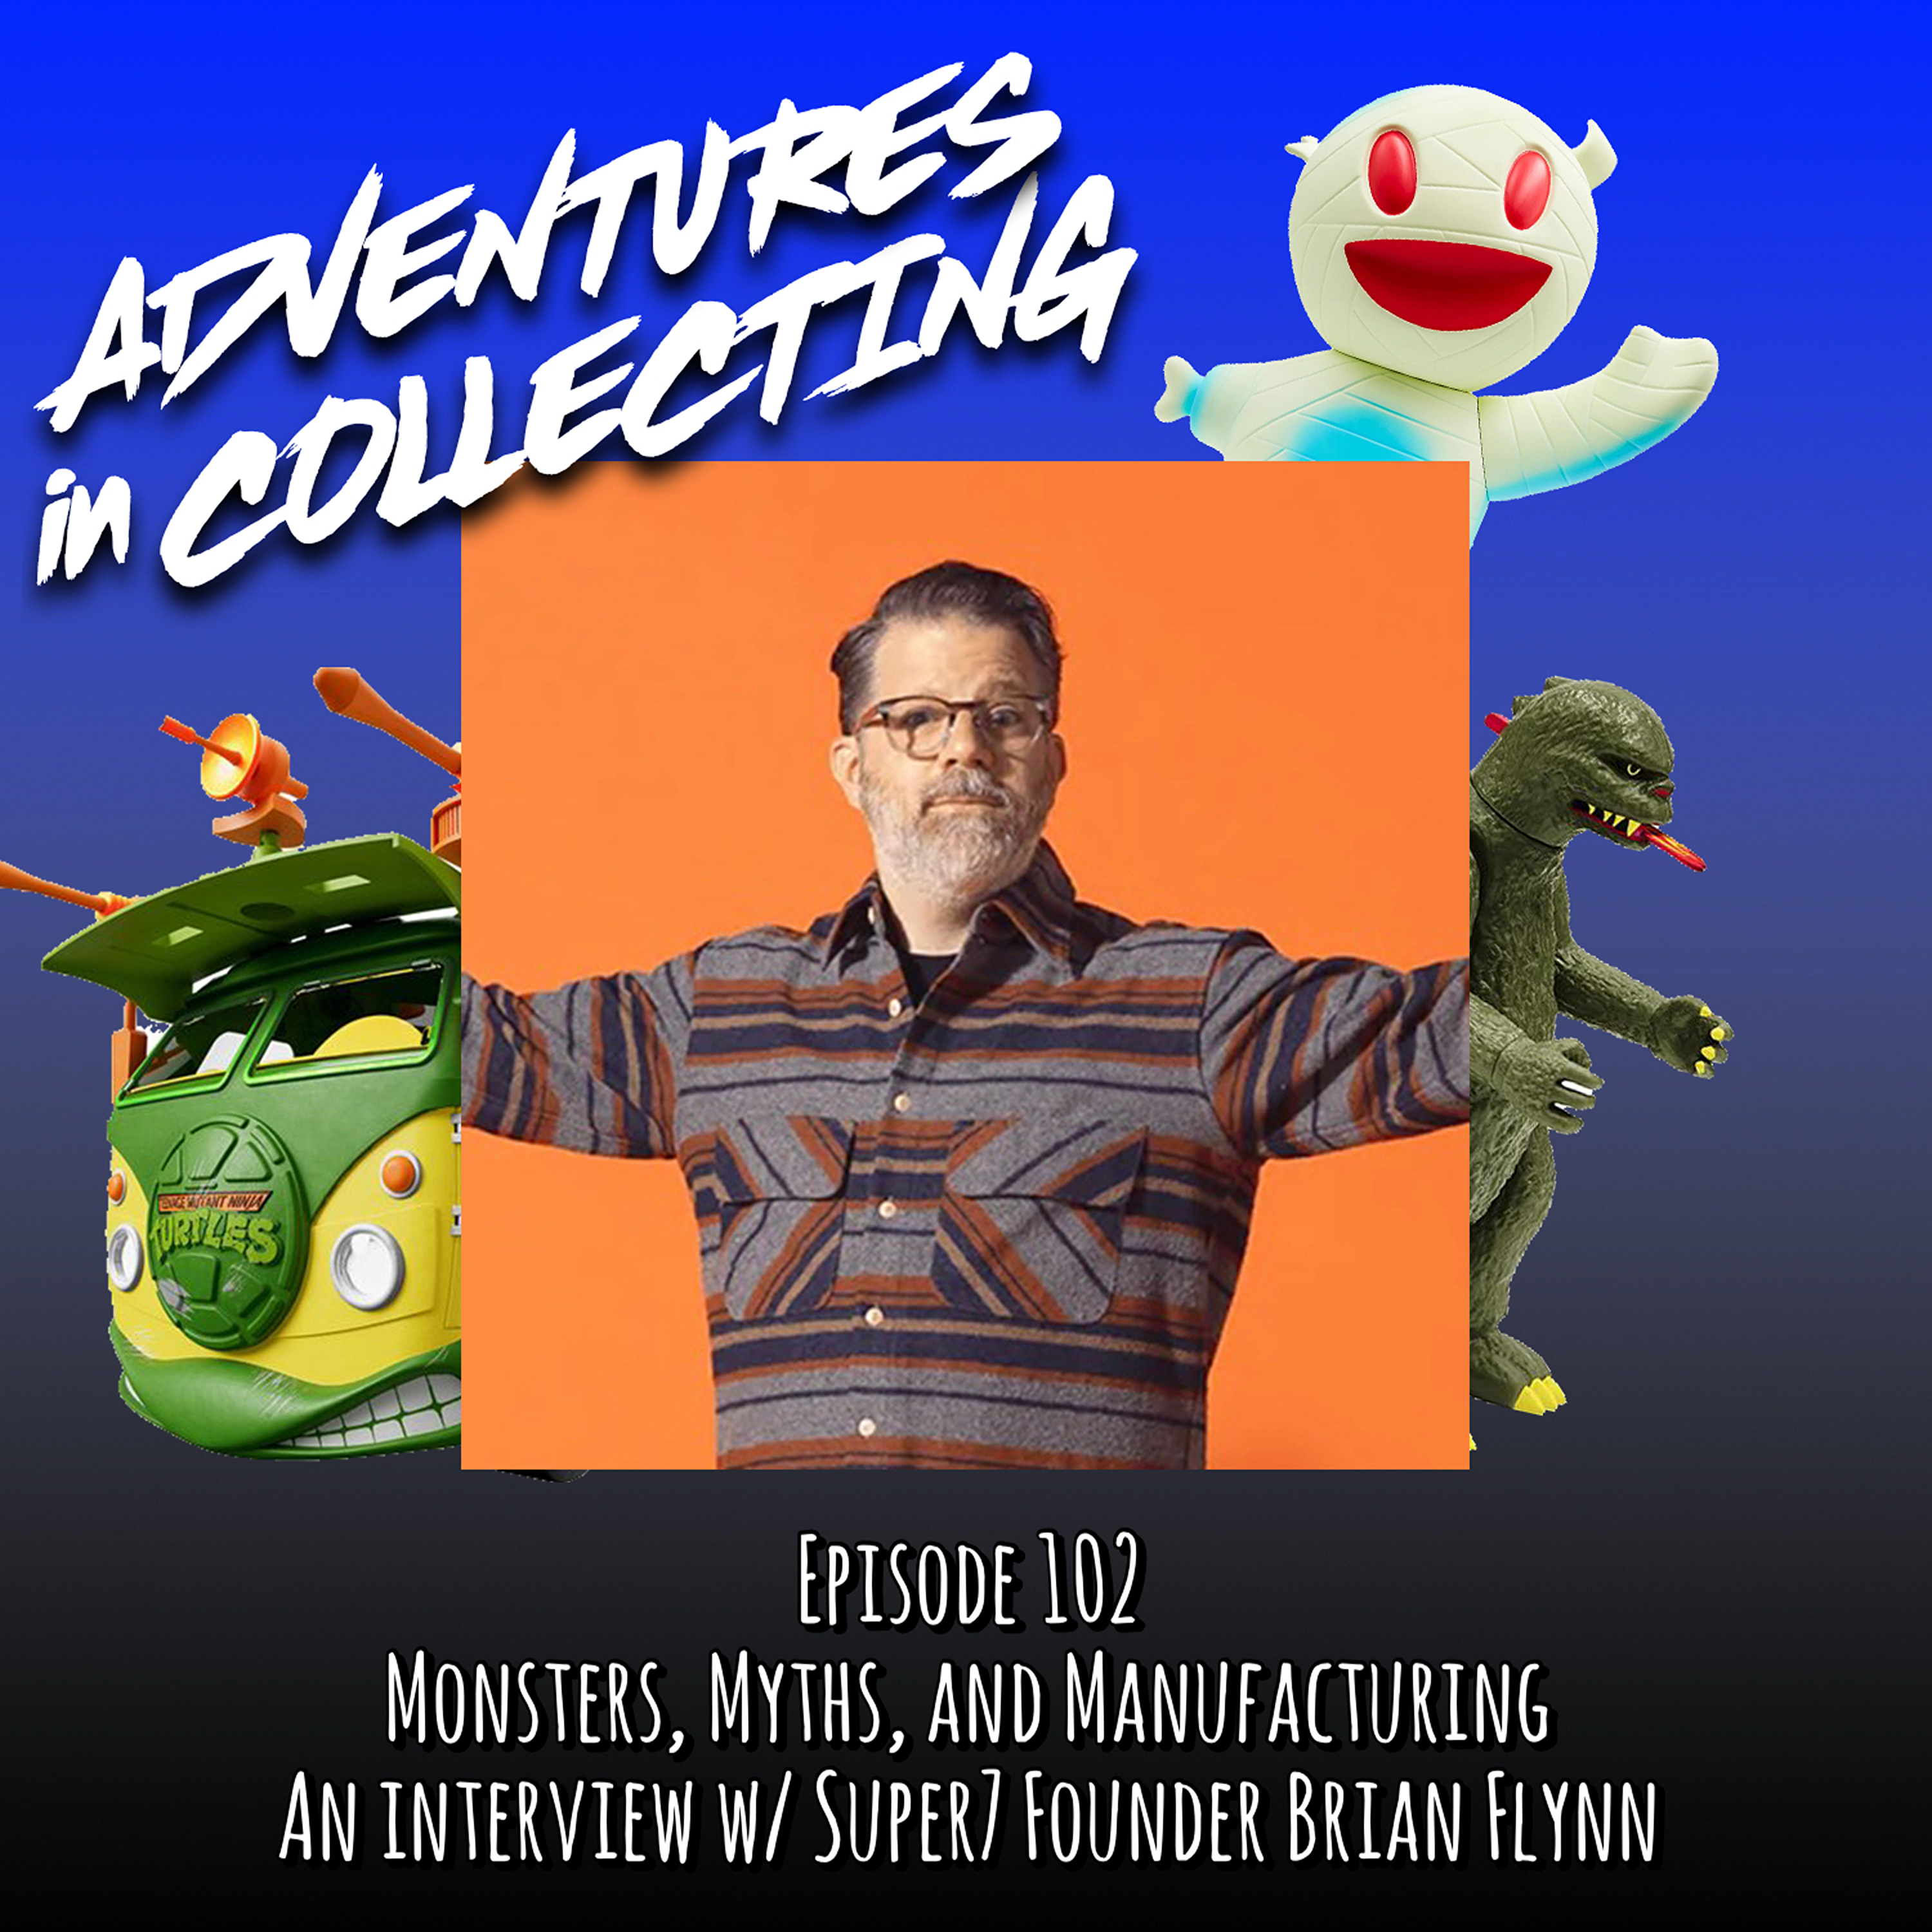 Monsters, Myths, and Manufacturing: An Interview with Super7 Founder Brian Flynn